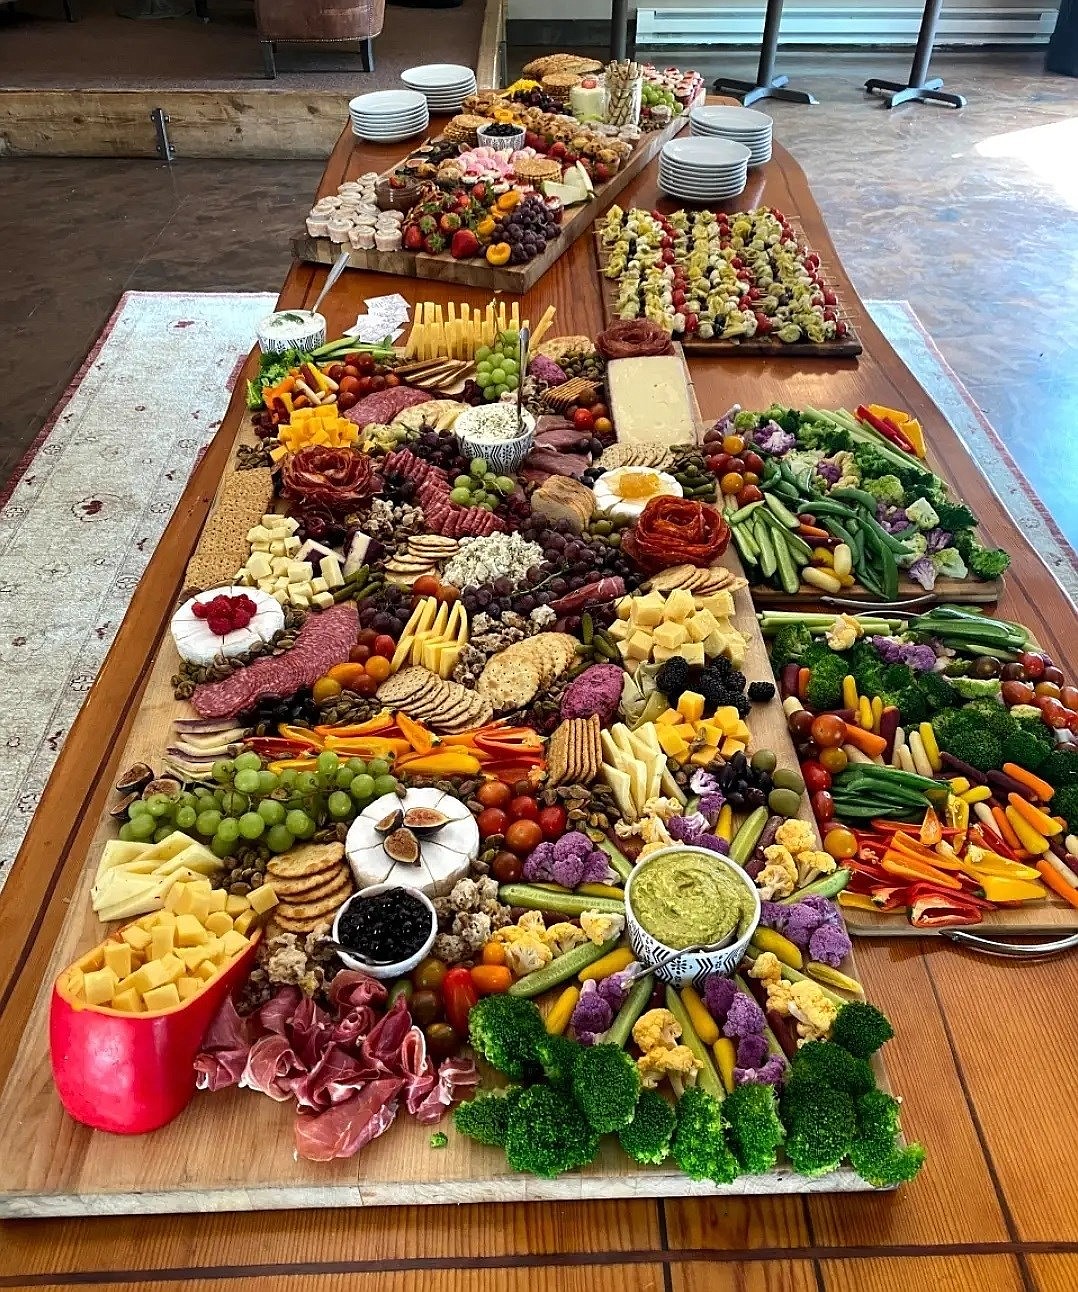 Raegan Hartley said every one of her charcuterie boards is made one-of-a-kind (courtesy photos).